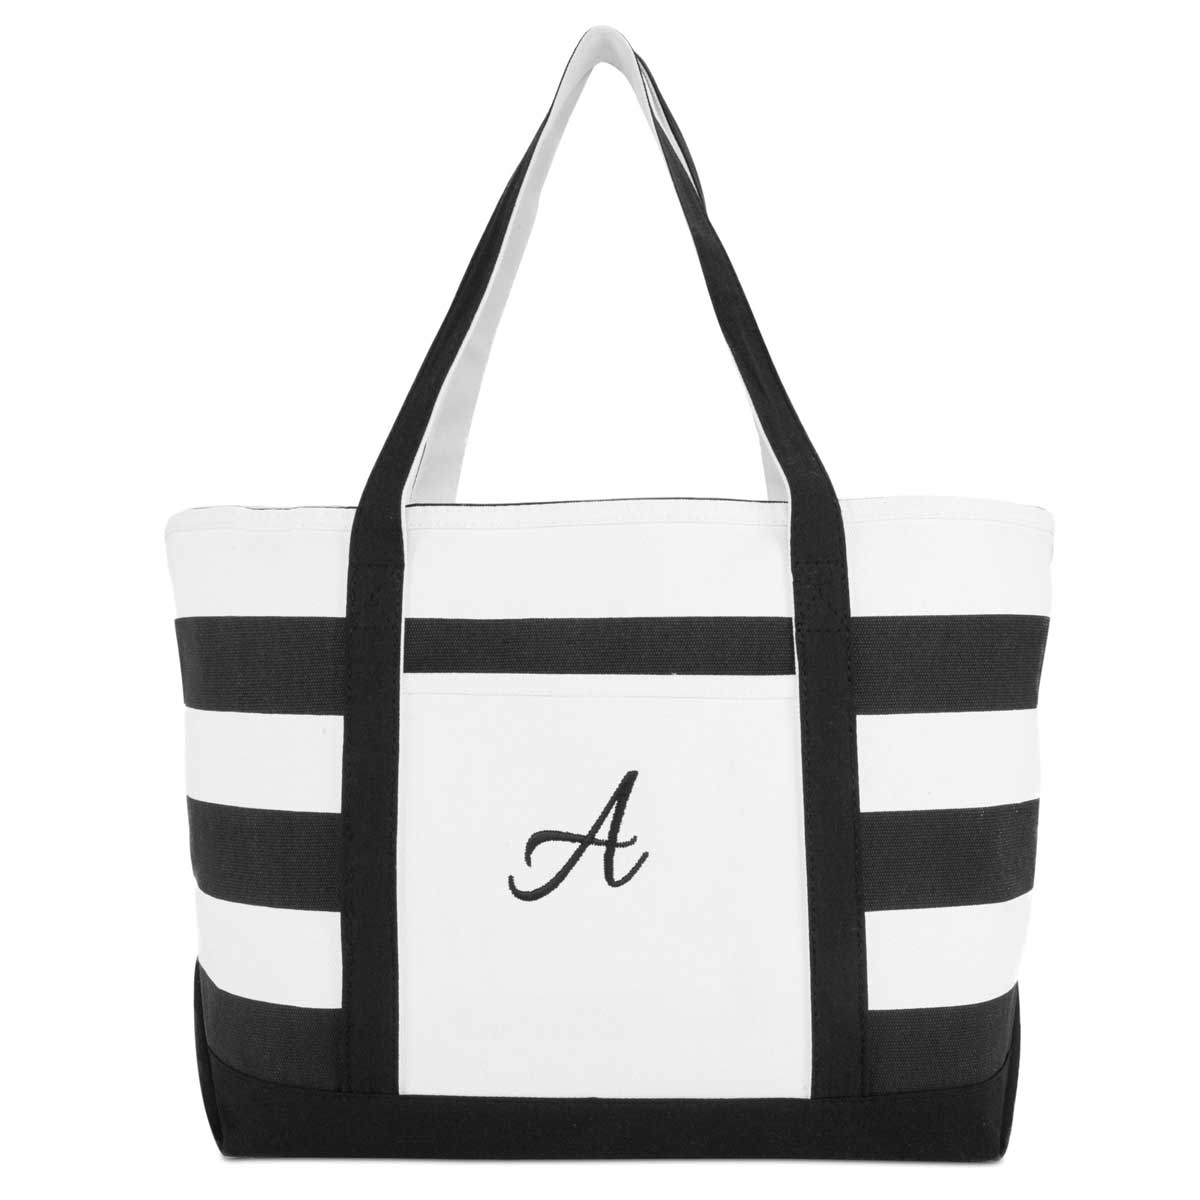 Heavy Canvas Zippered Shopping Tote Bags